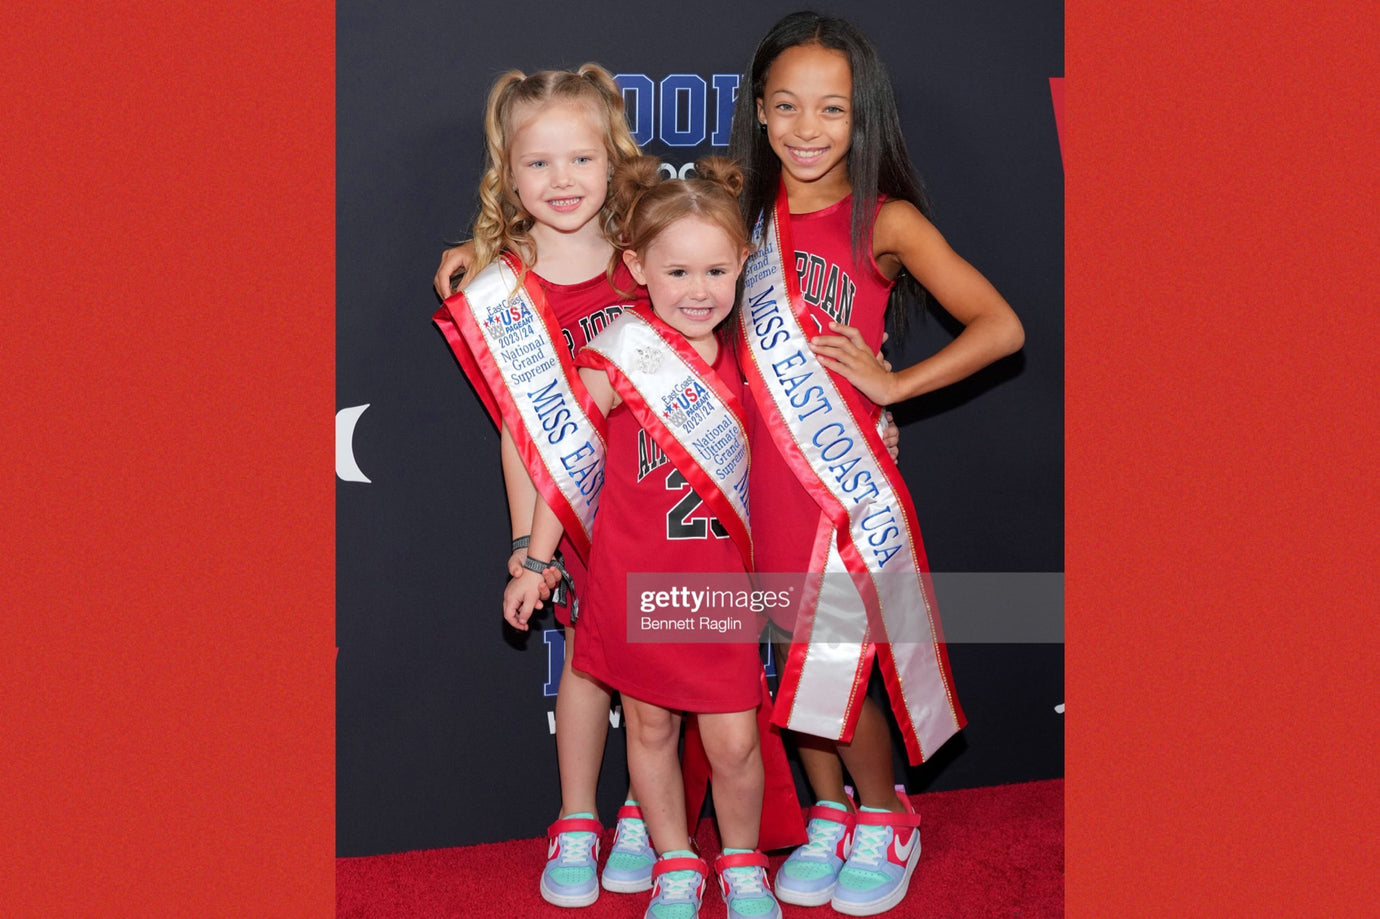 NEW YORK, NEW YORK - SEPTEMBER 06: (L-R) Vivienne Lucille, Adaline Guthridge and Marley Gomes,  attends the 13th Annual Rookie USA Fashion Show at Iron 23 on September 06, 2023 in New York City. (Photo by Bennett Raglin/Getty Images for Rookie USA)